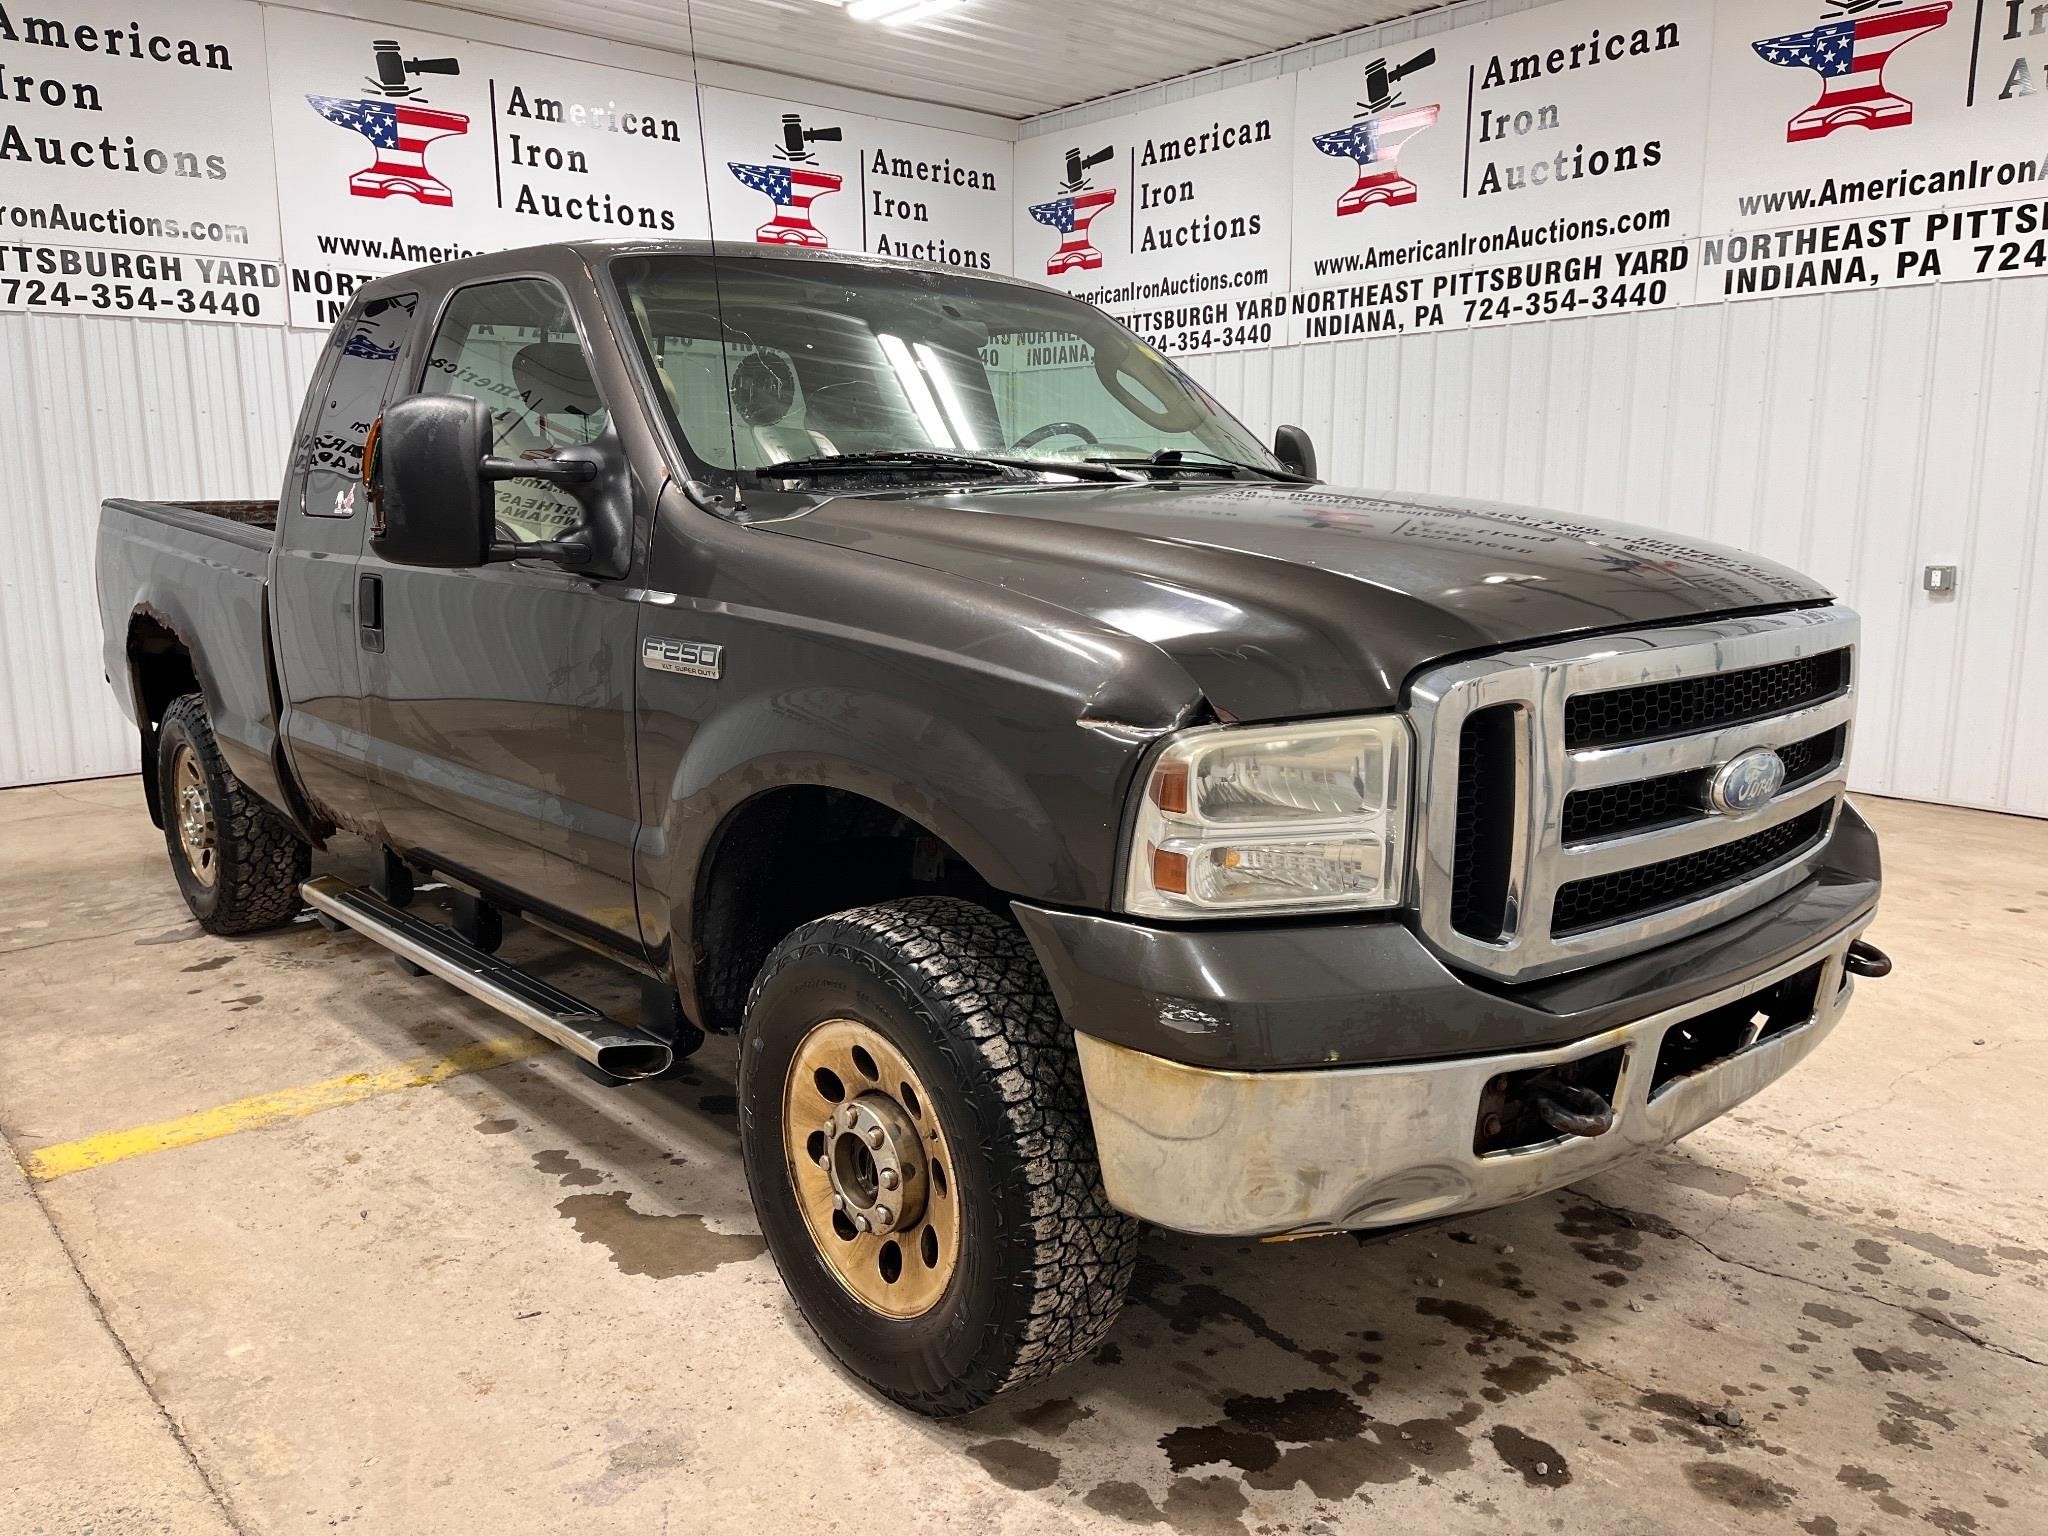 2007 Ford F 250 Truck- Titled -NO RESERVE